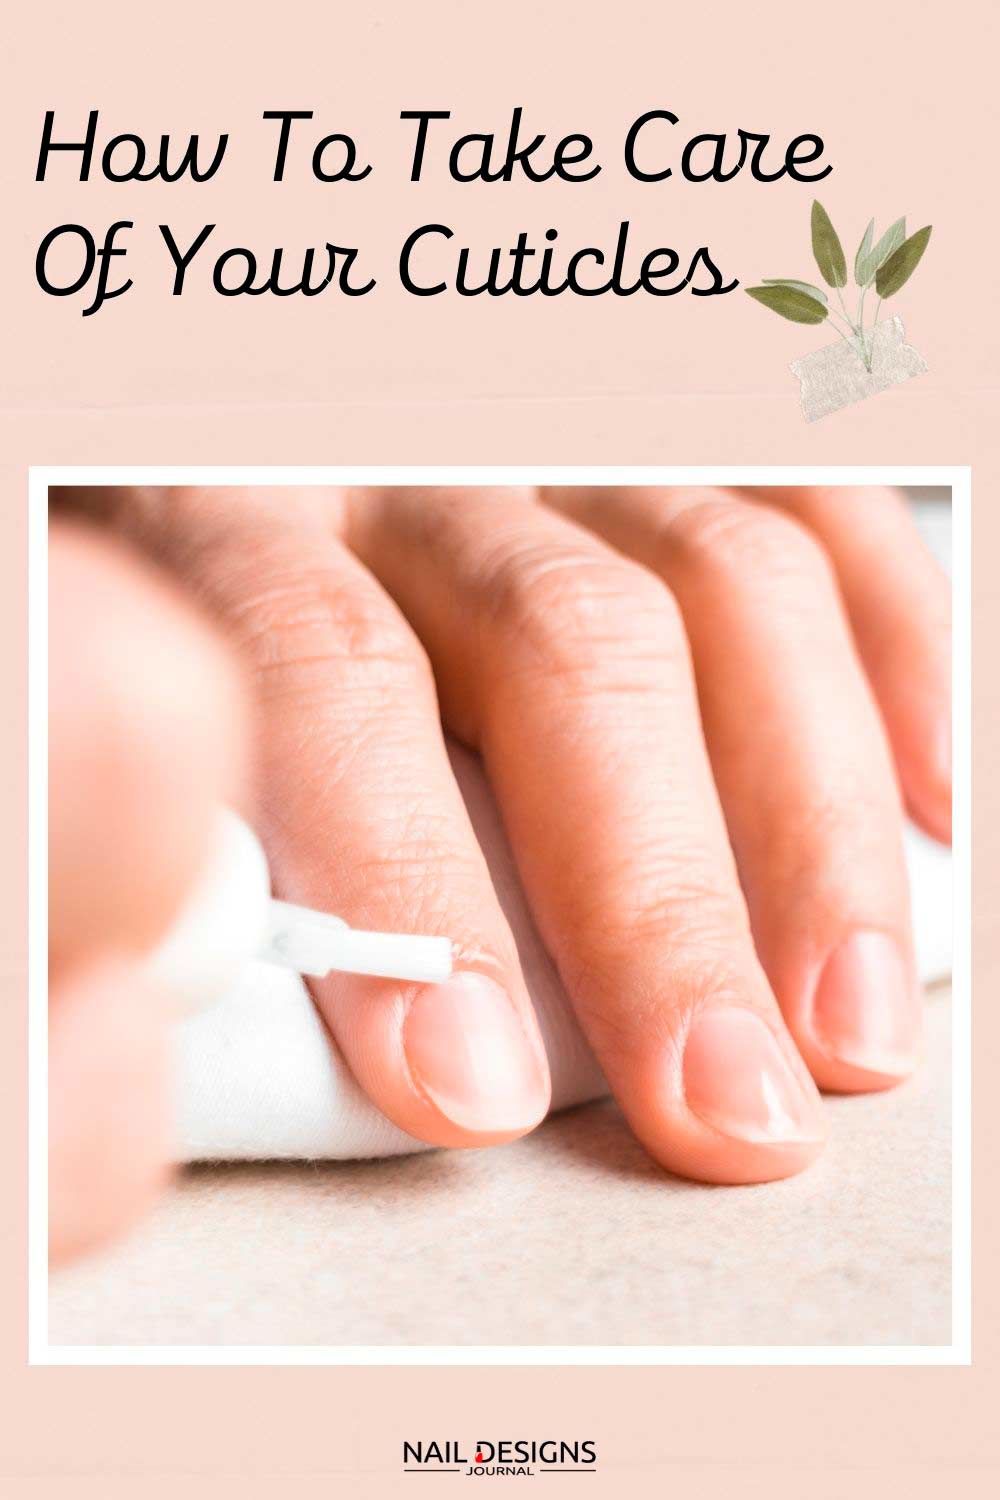 How To Take Care Of Your Cuticles